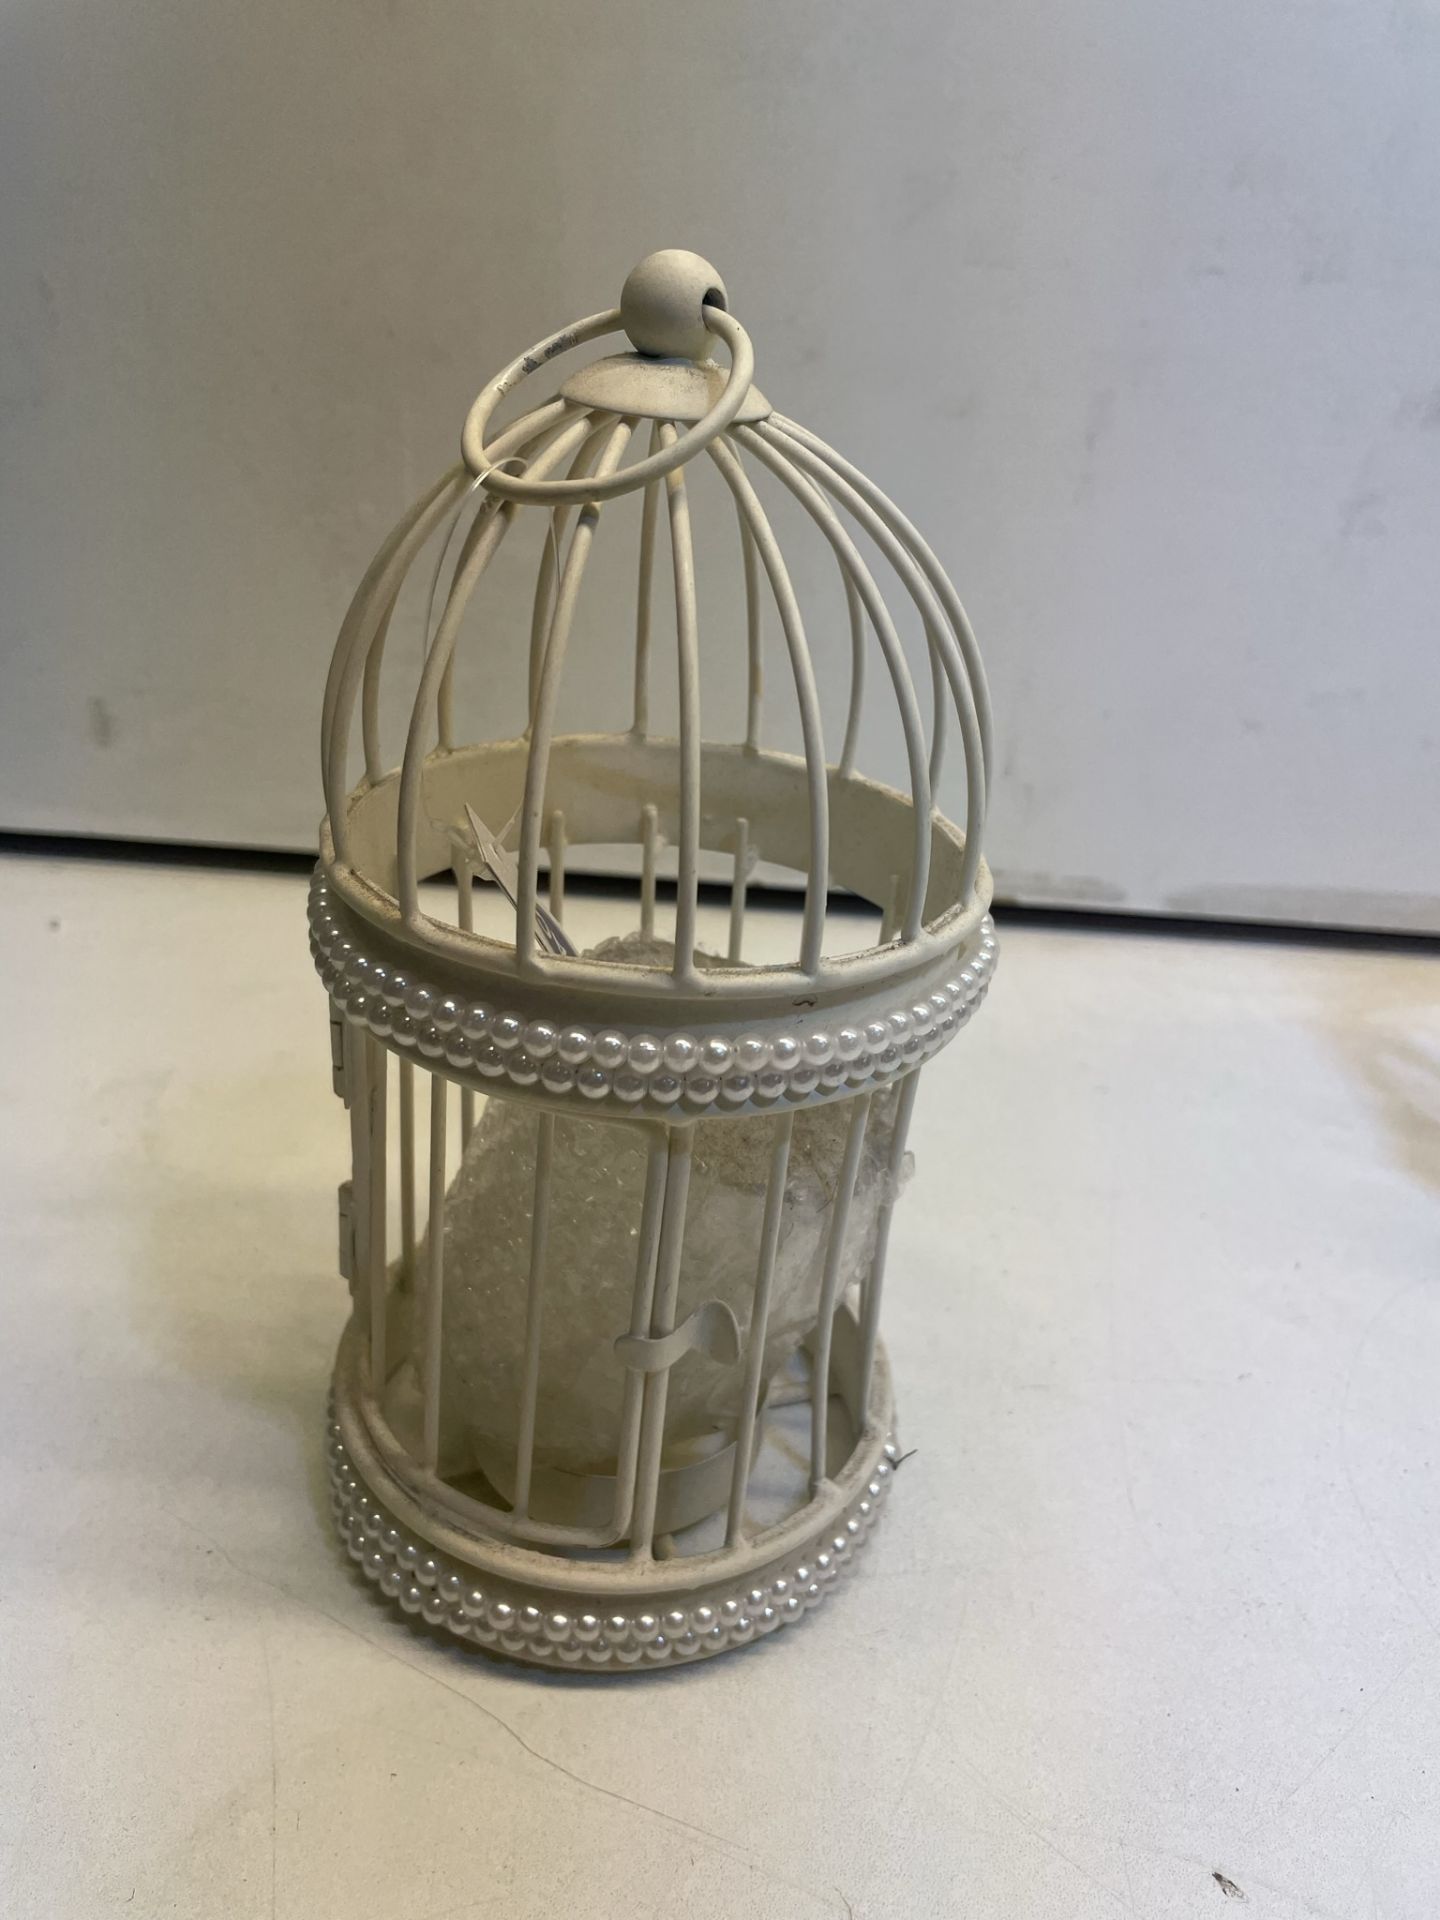 7 x Metal Birdcage Candle Holders - Image 3 of 3